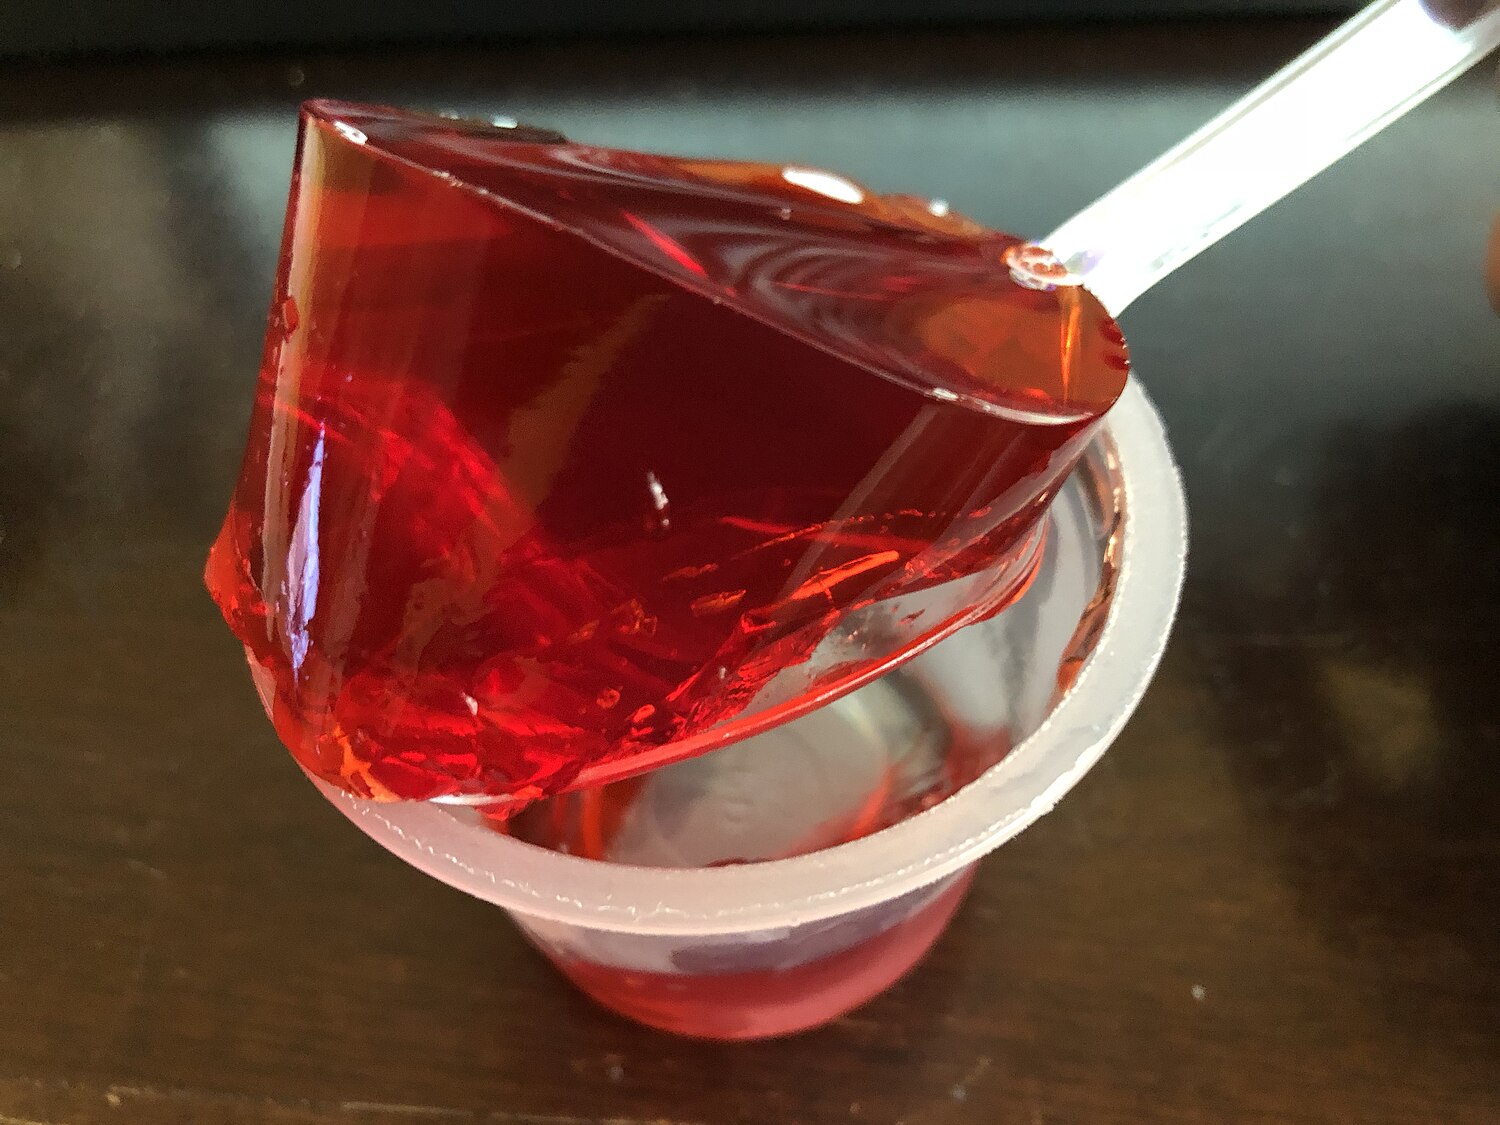 https://upload.wikimedia.org/wikipedia/commons/thumb/7/7f/2019-10-10_22_15_43_Gelatin_from_a_single_opened_cup_of_Jell-O_strawberry_gelatin_snack_being_lifted_by_a_spoon_in_the_Franklin_Farm_section_of_Oak_Hill%2C_Fairfax_County%2C_Virginia.jpg/1500px-thumbnail.jpg